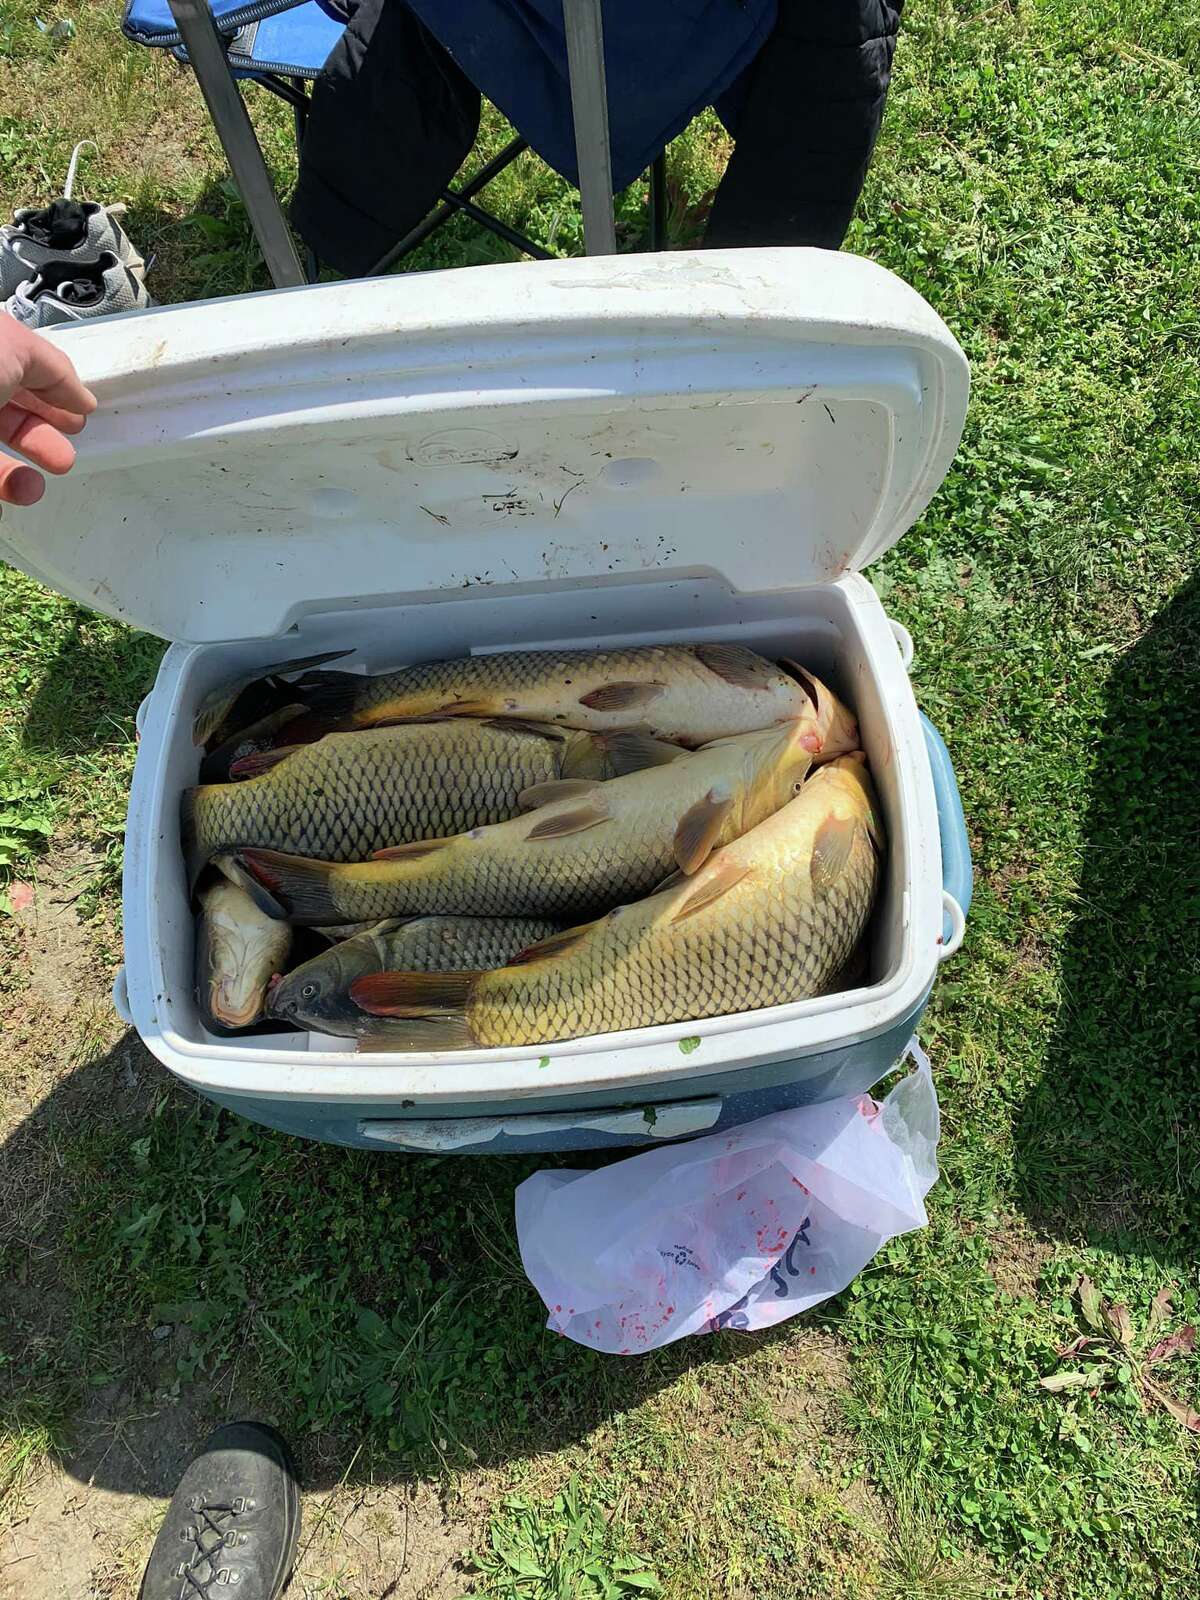 The the Department of Energy and Environmental Protection’s Environmental Conservation Police have cited three men for “over bagging” carp from the Connecticut River in Cromwell, Conn., issuing fines over $4,200, the agency said on Monday, May 16, 2022.